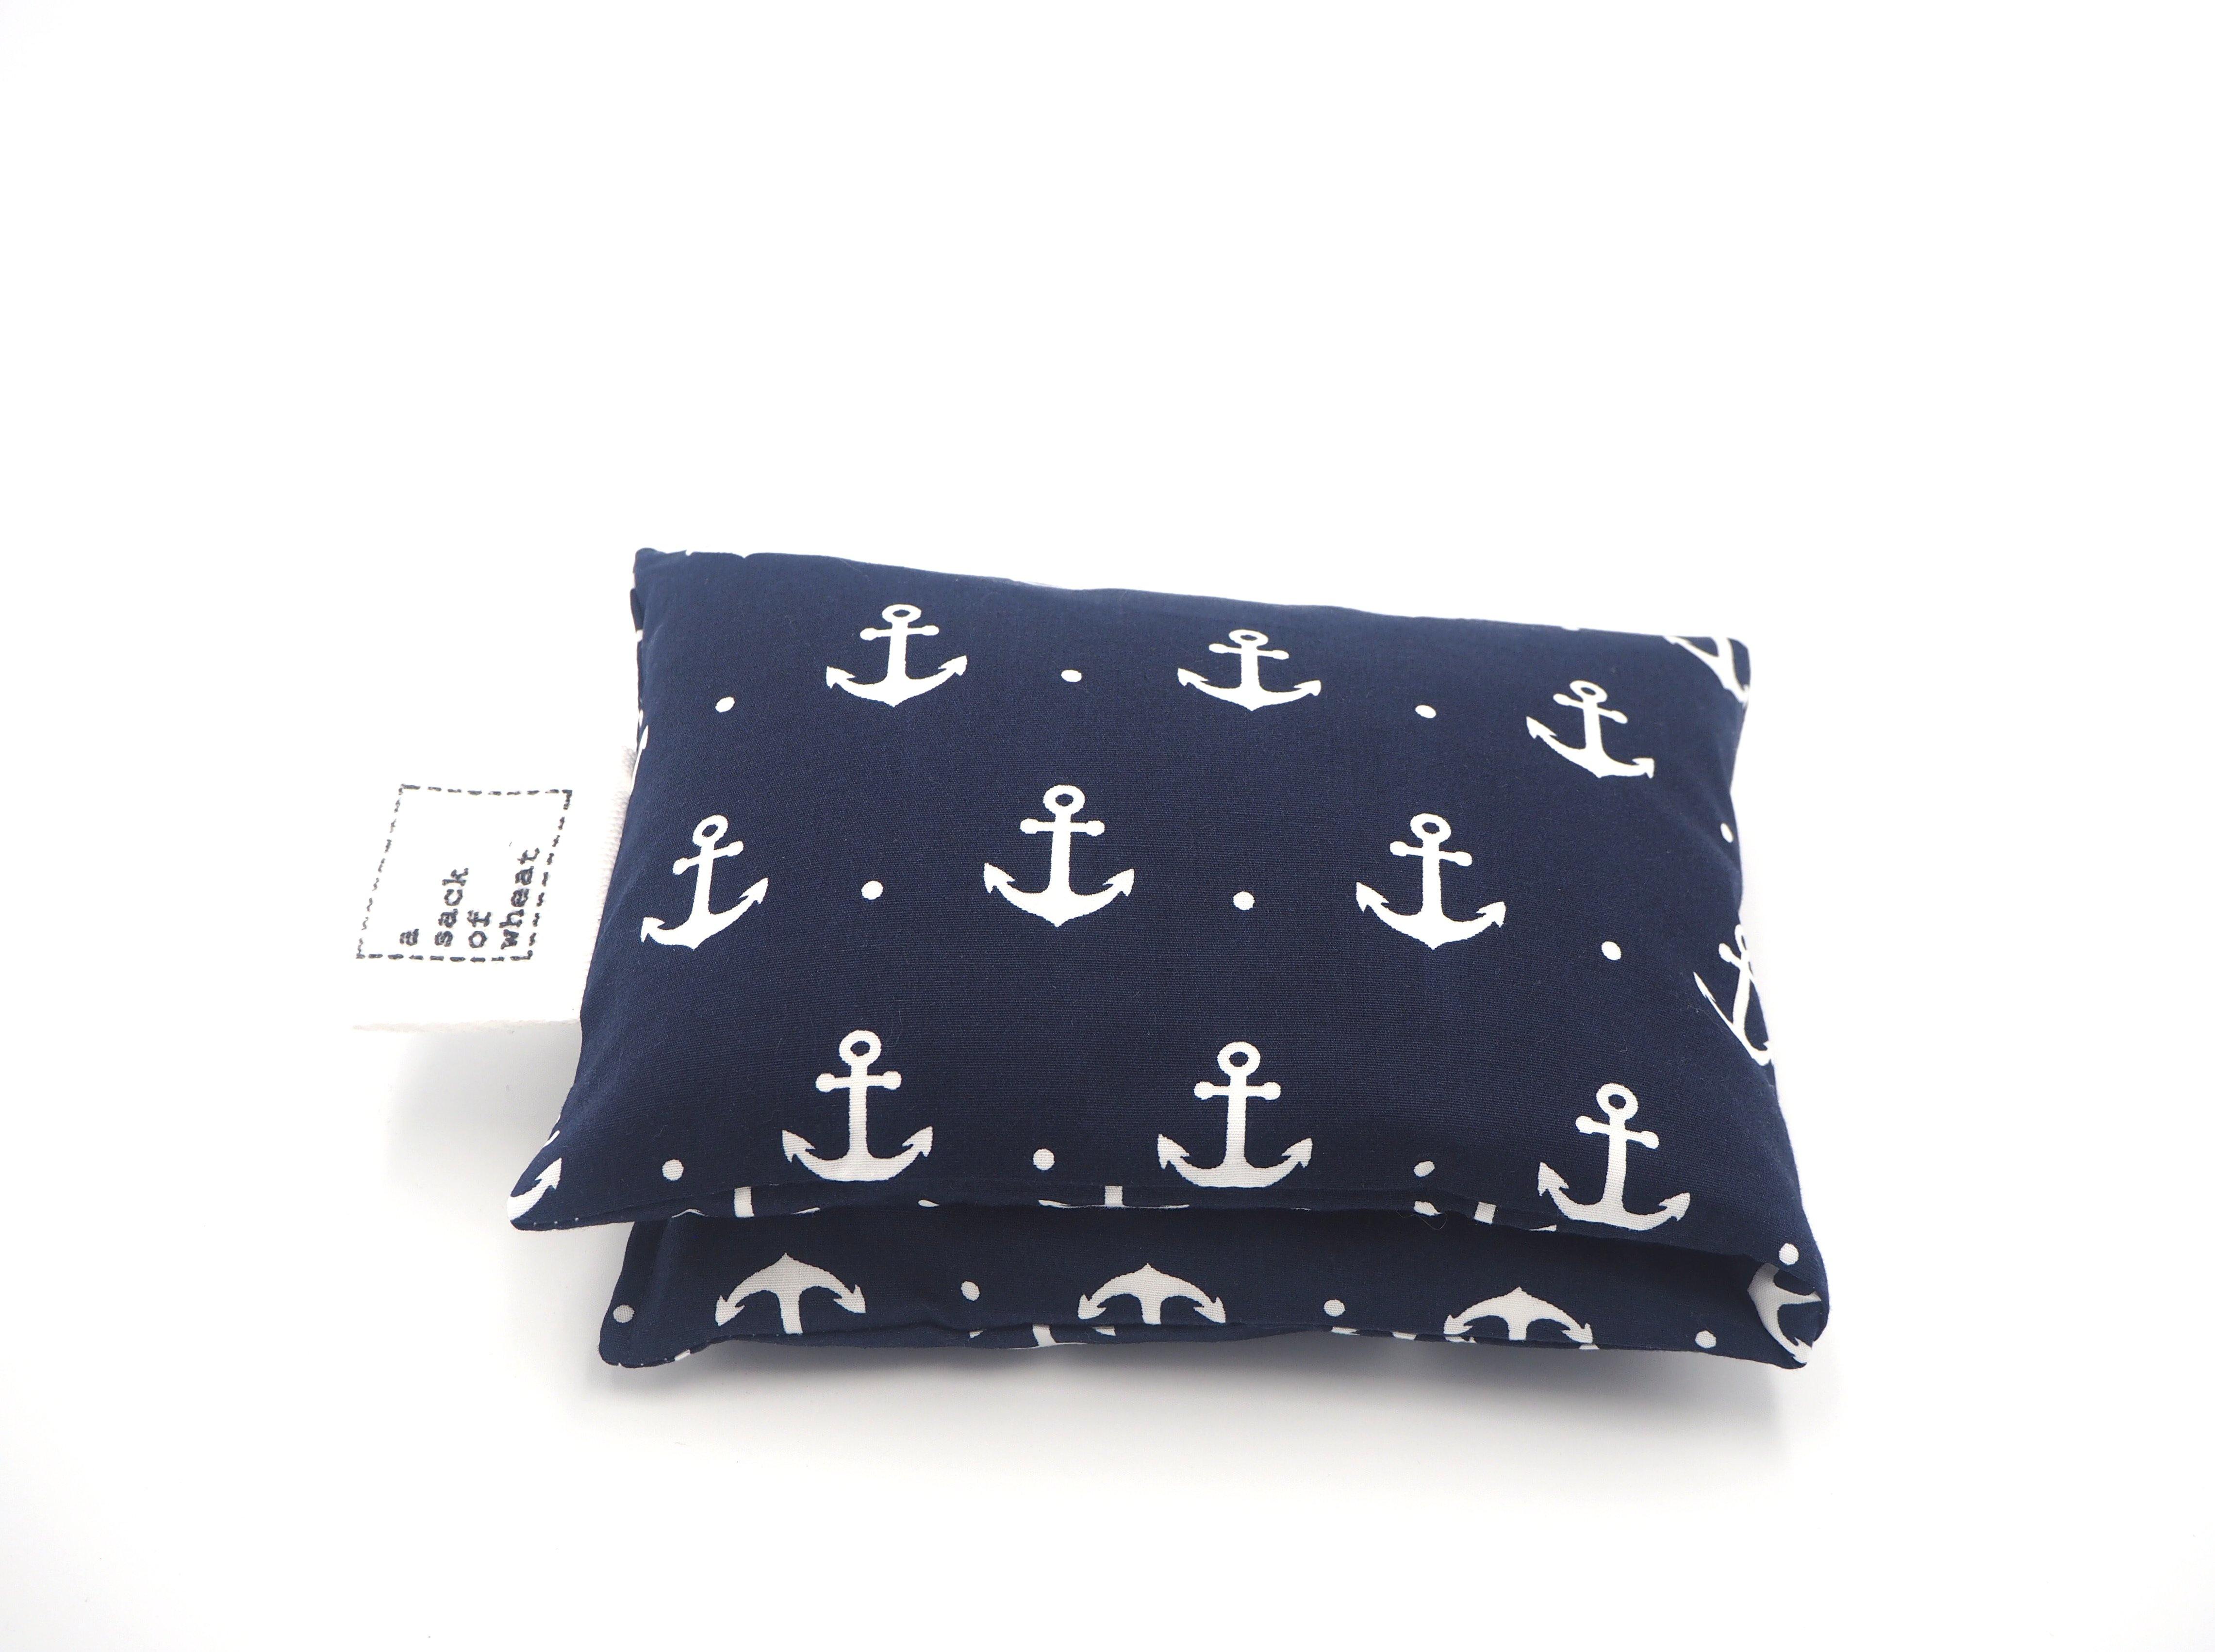 Folded view of A Sack Of Wheat, featuring classic ship anchors on a royal navy blue background, 100% cotton fabric